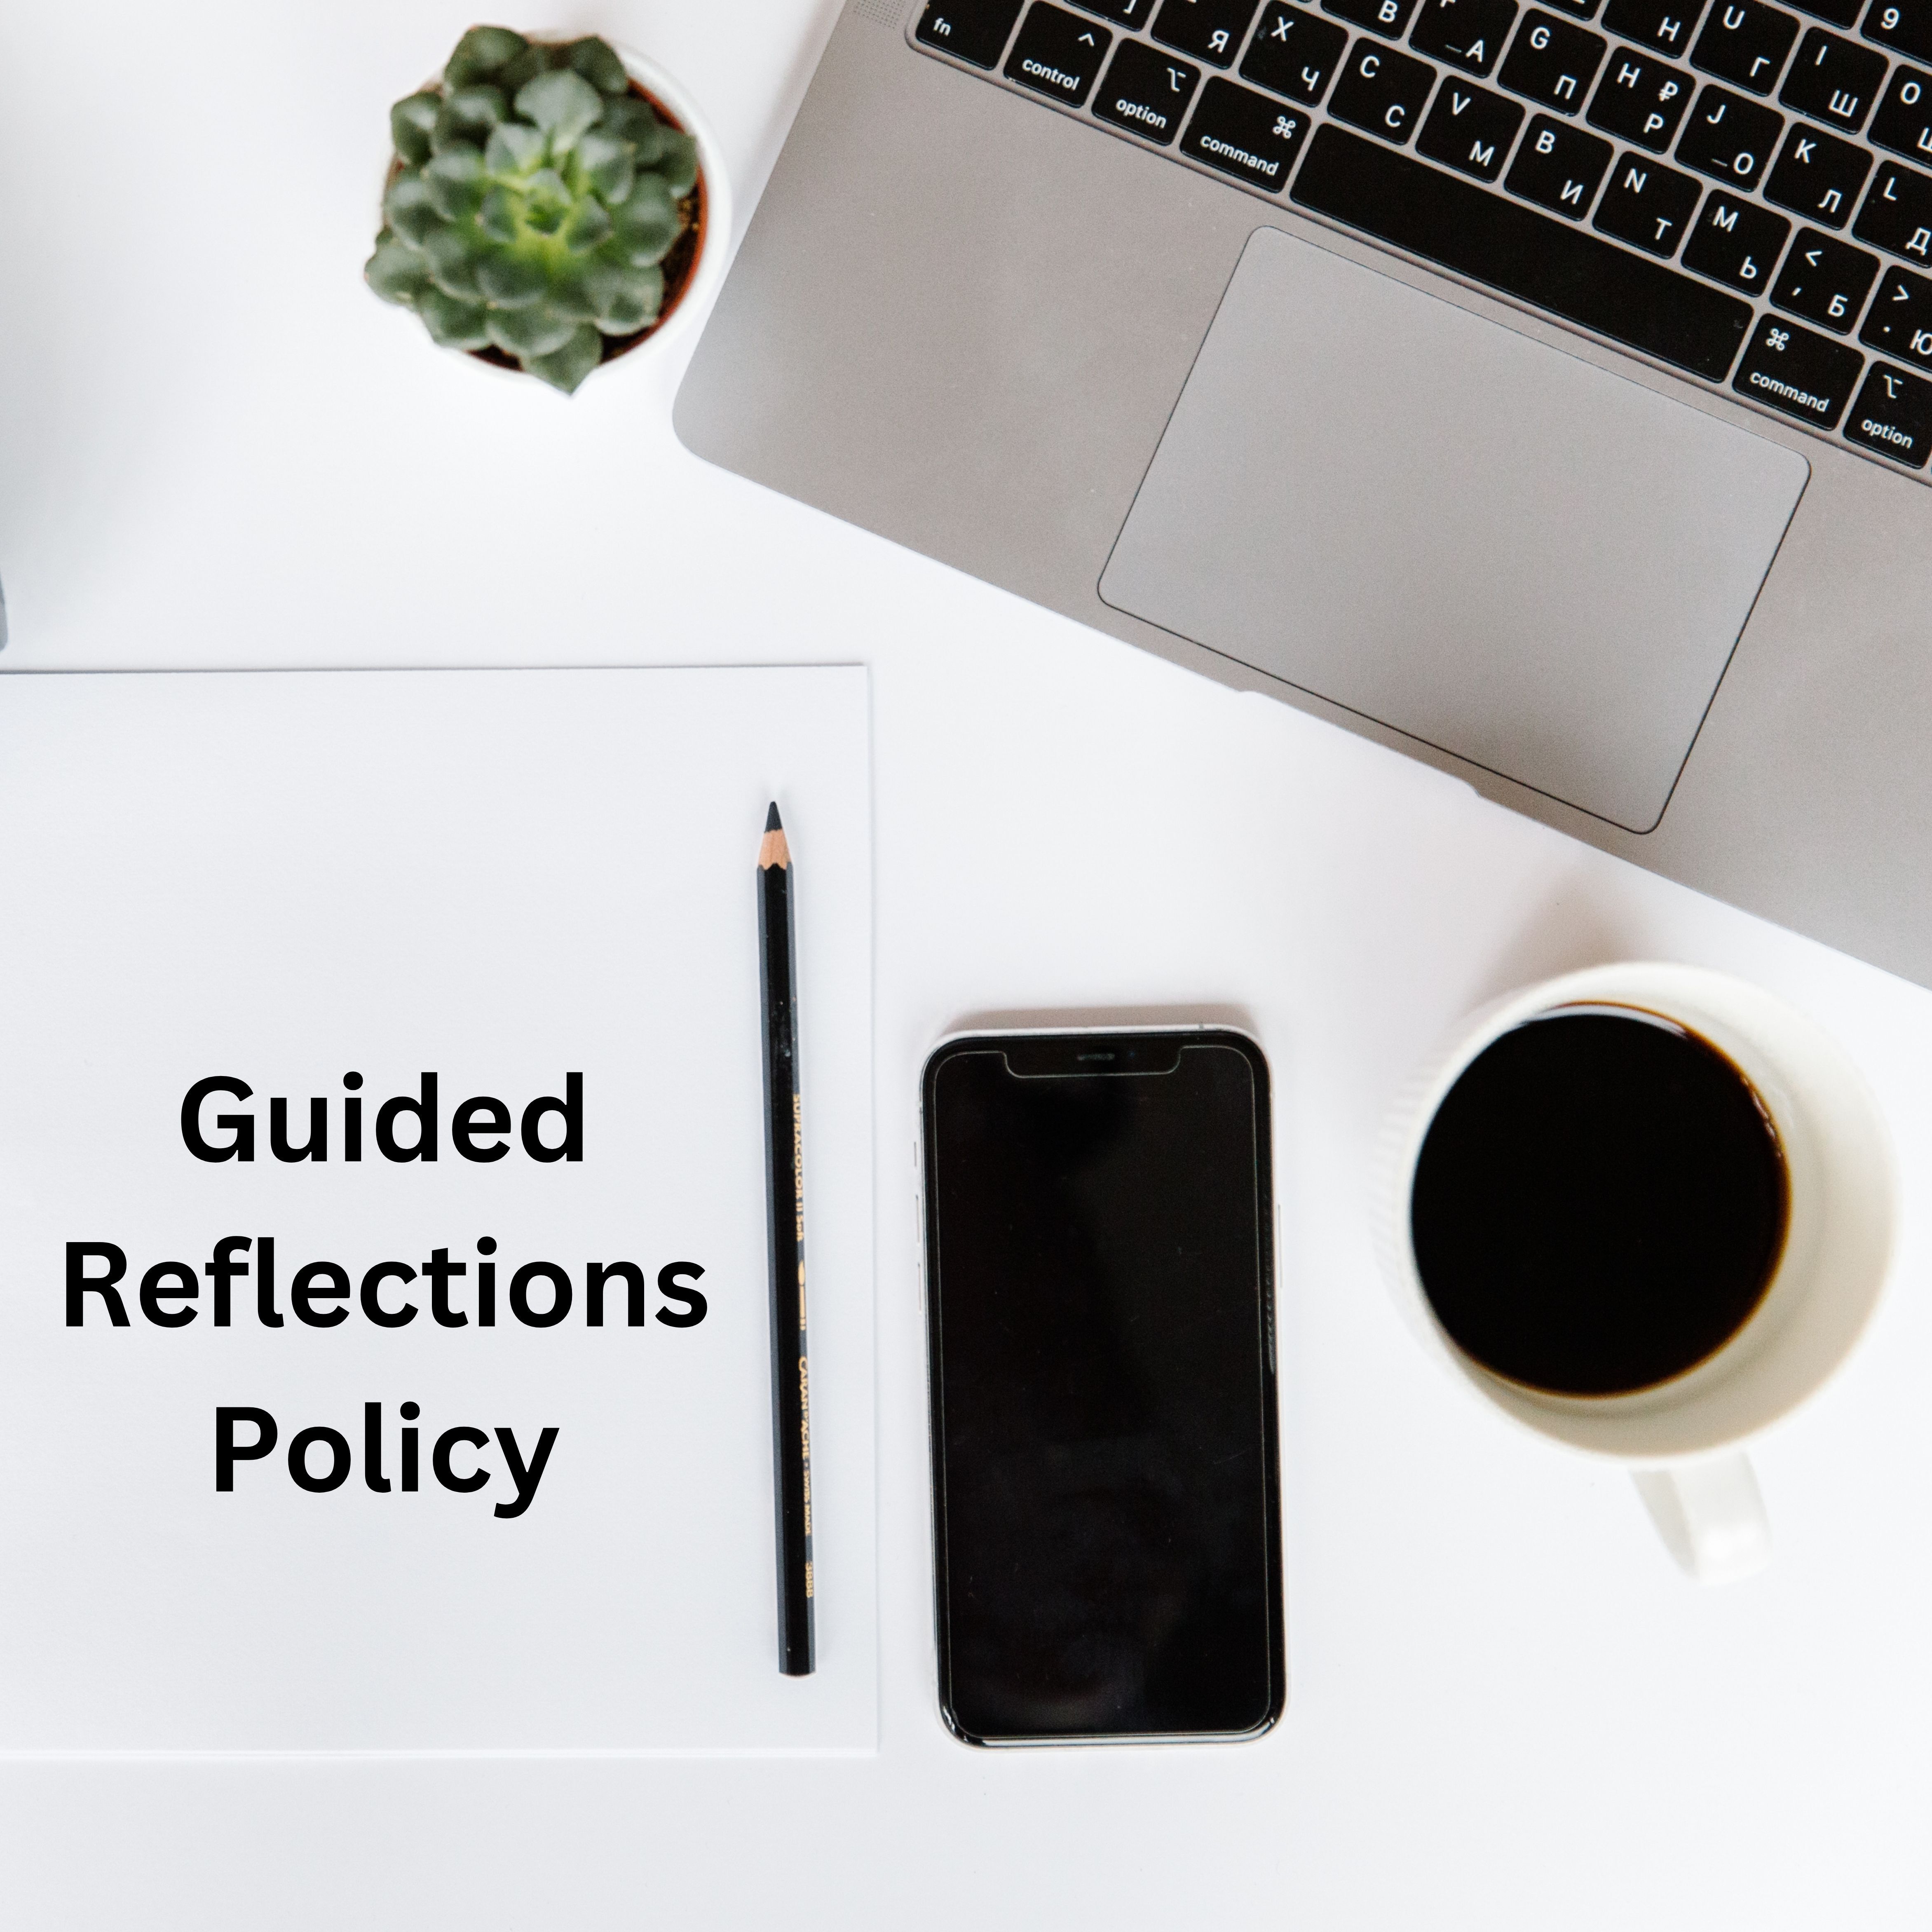 Guided Reflections Policy